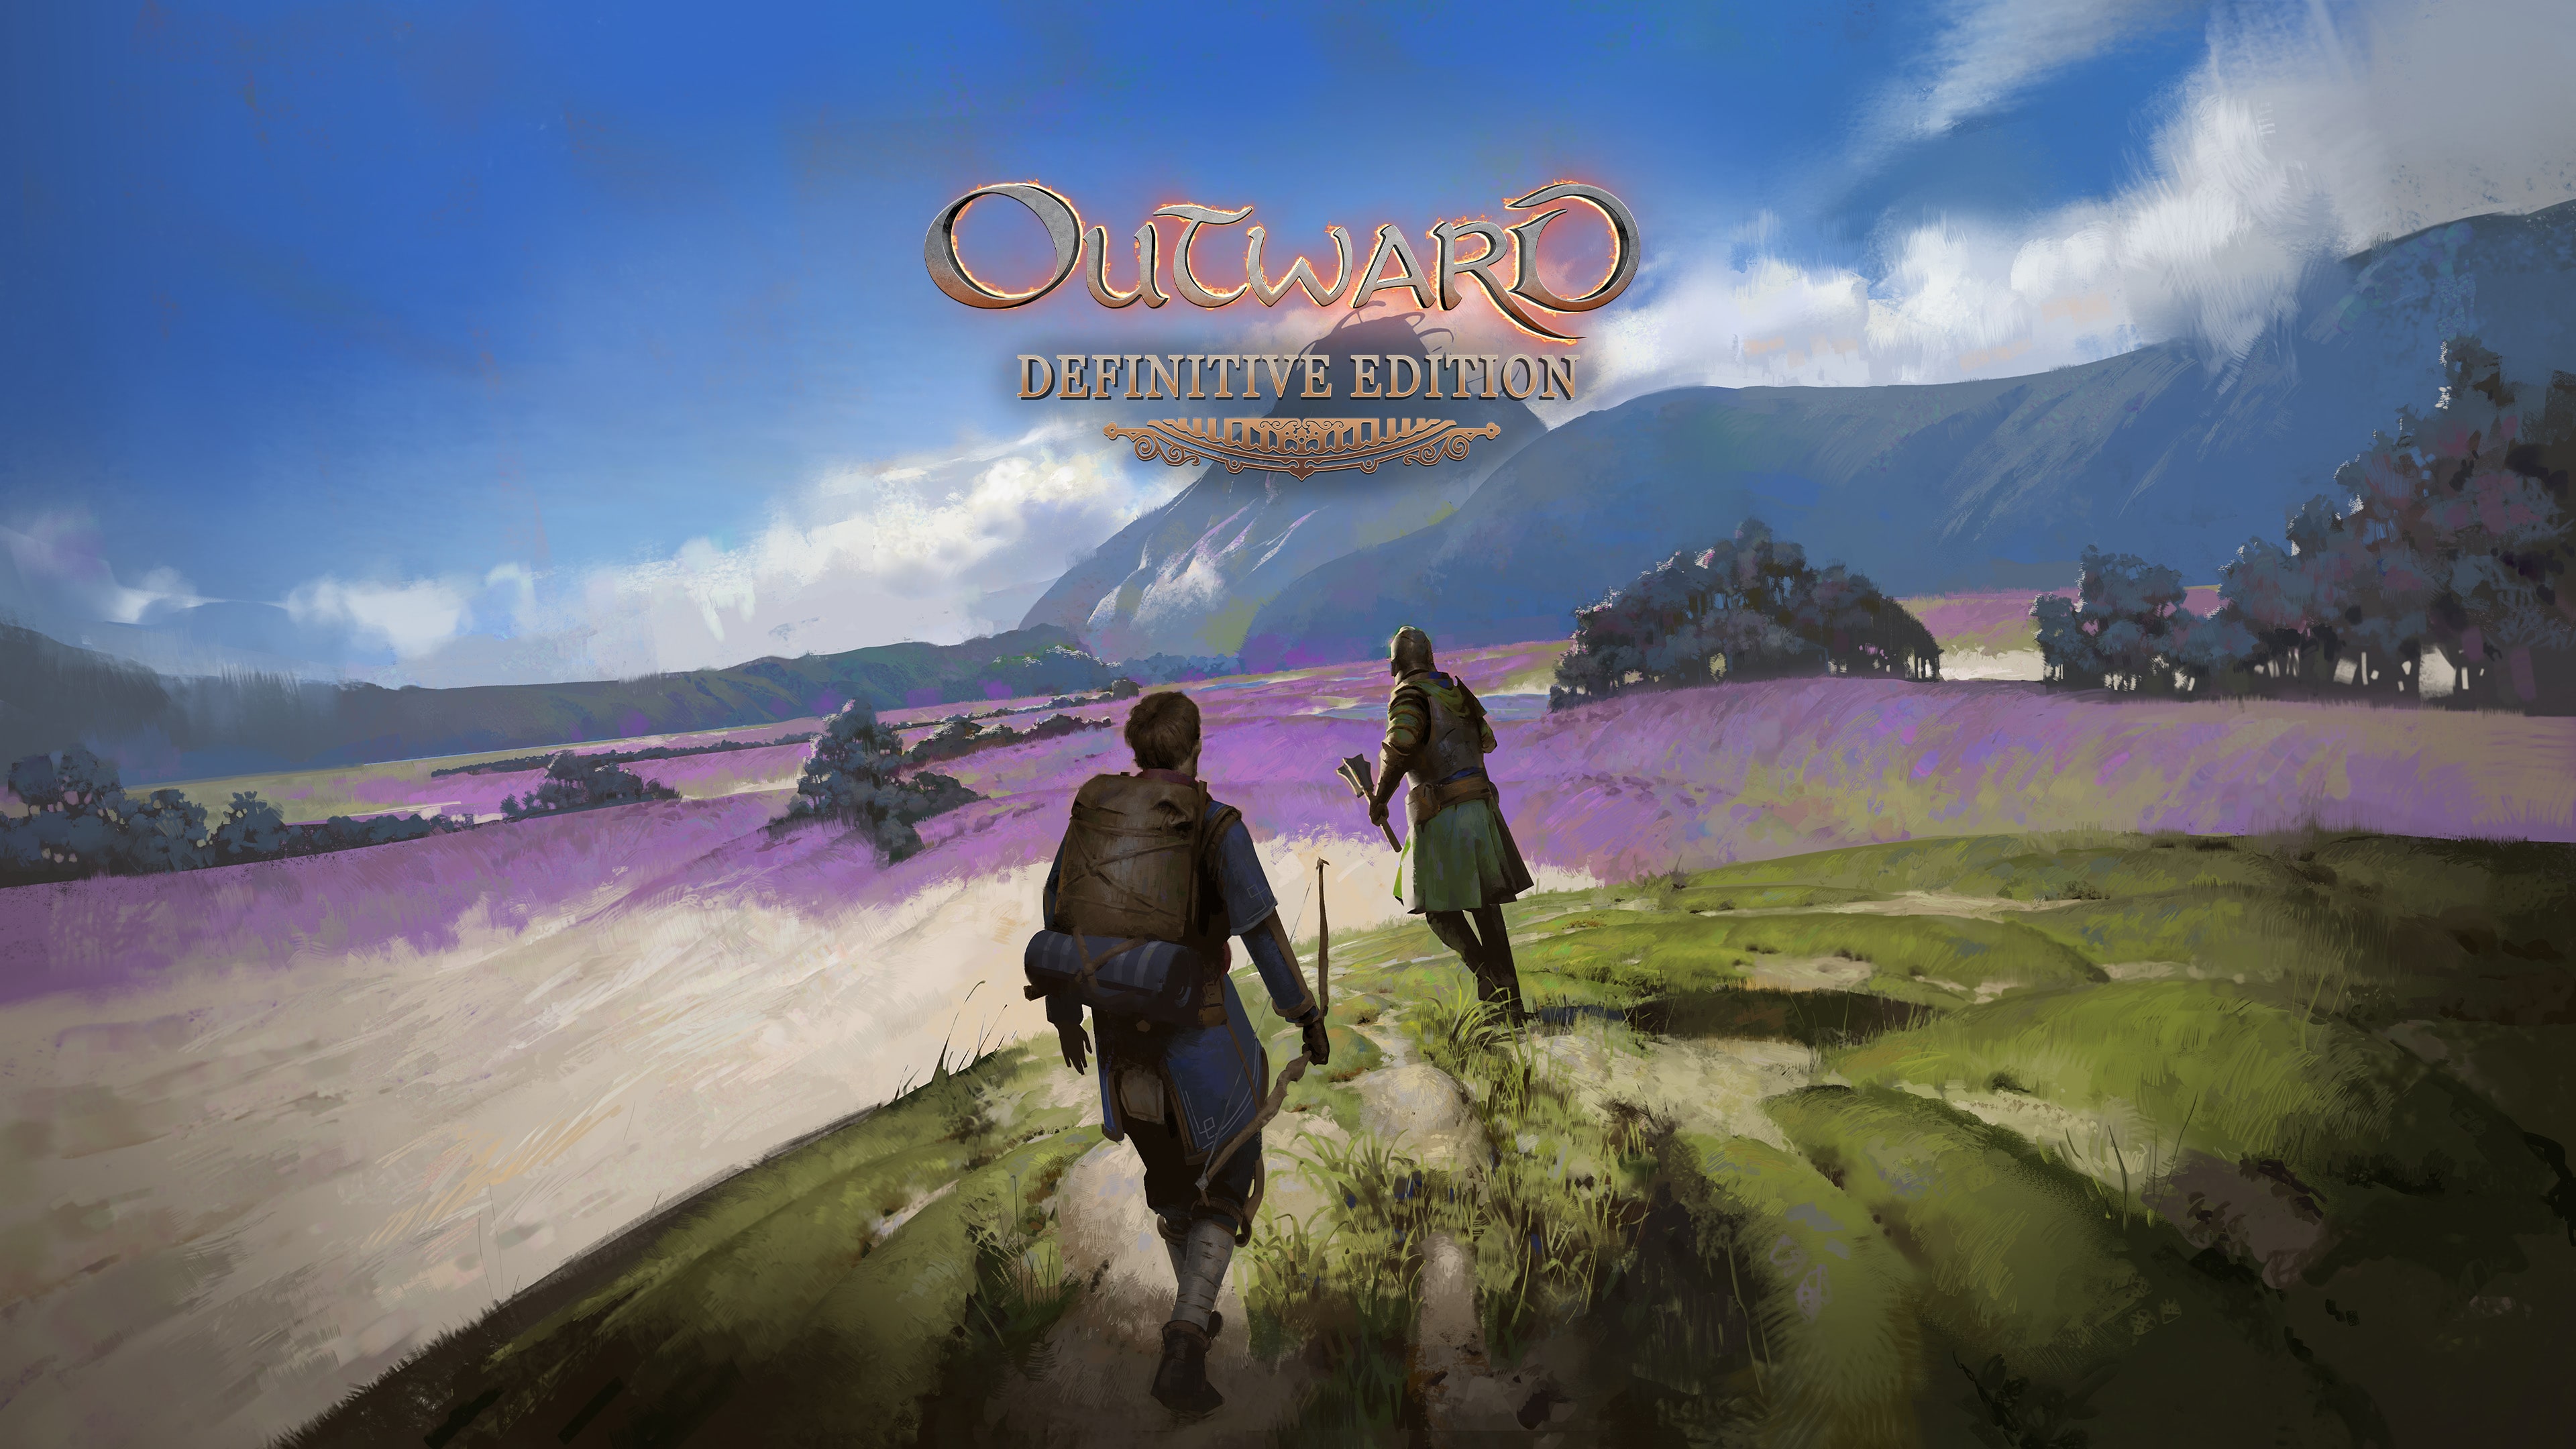 Outward Definitive Edition (Simplified Chinese, English, Korean, Japanese)